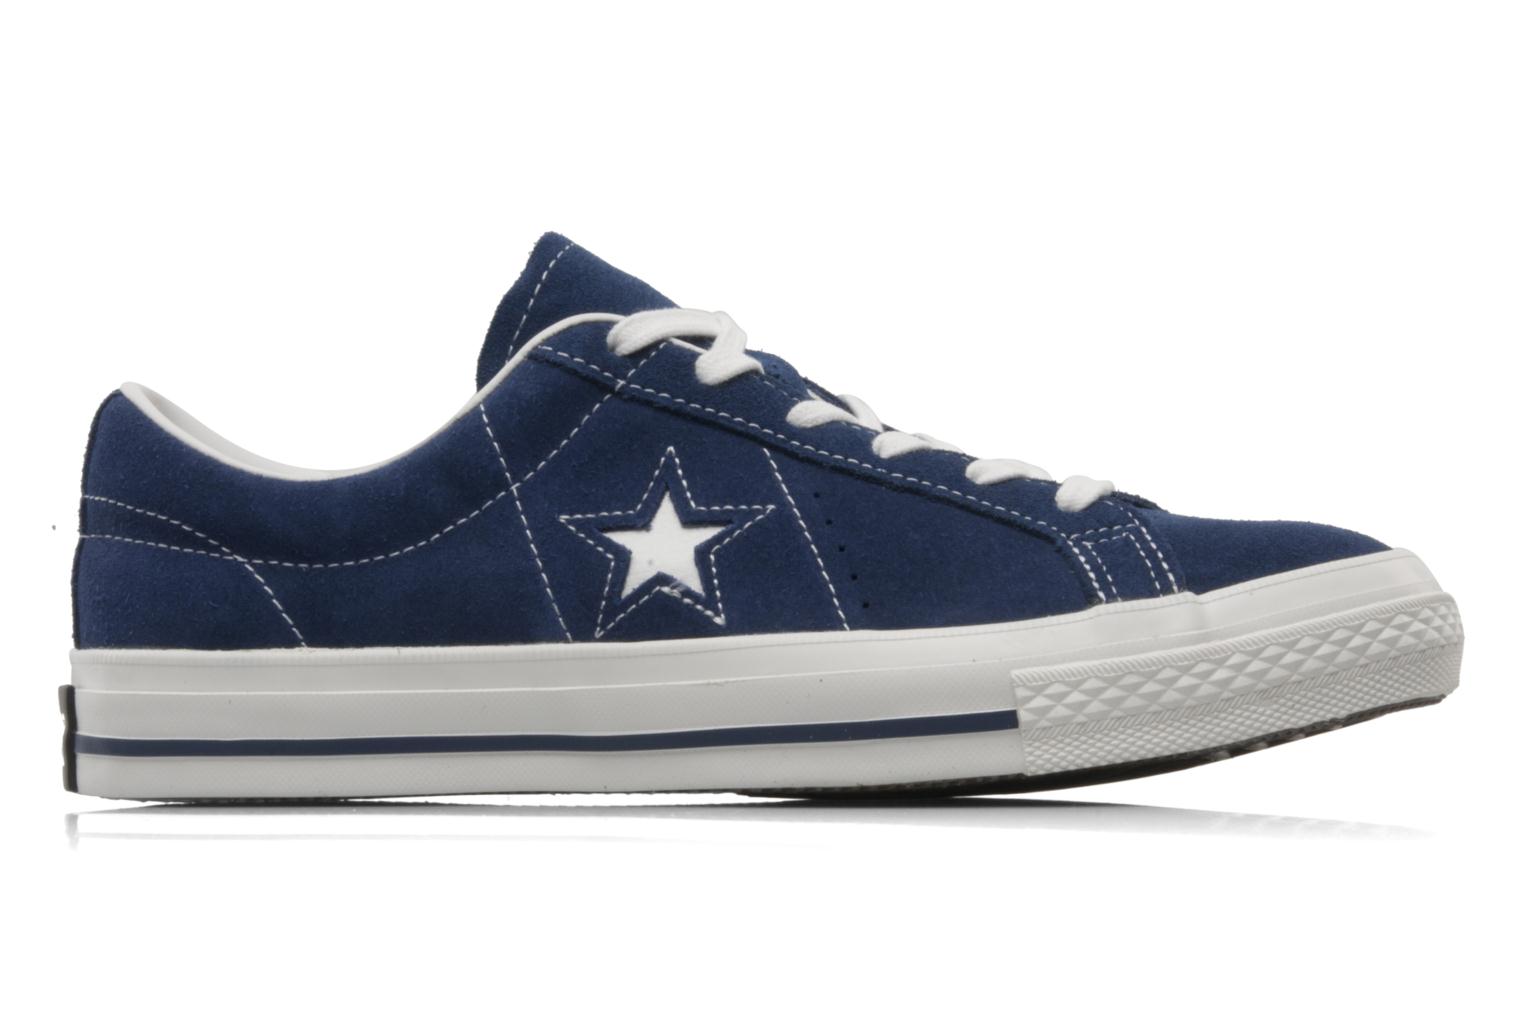 Converse One Star Classic 74 Suede Ox M Trainers in Blue at Sarenza.co ...